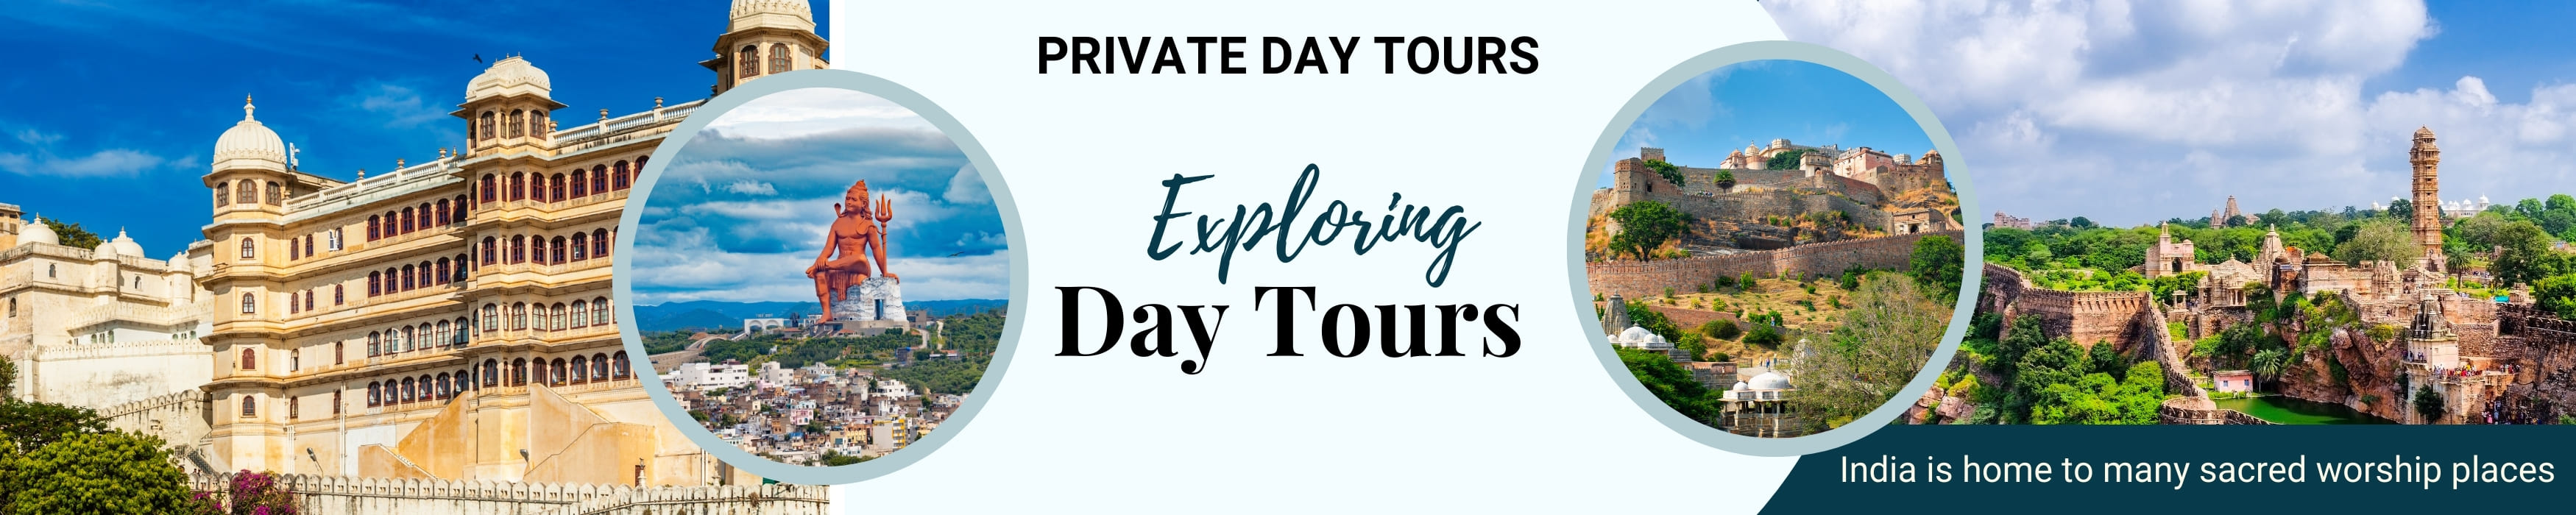 Private Day Tours